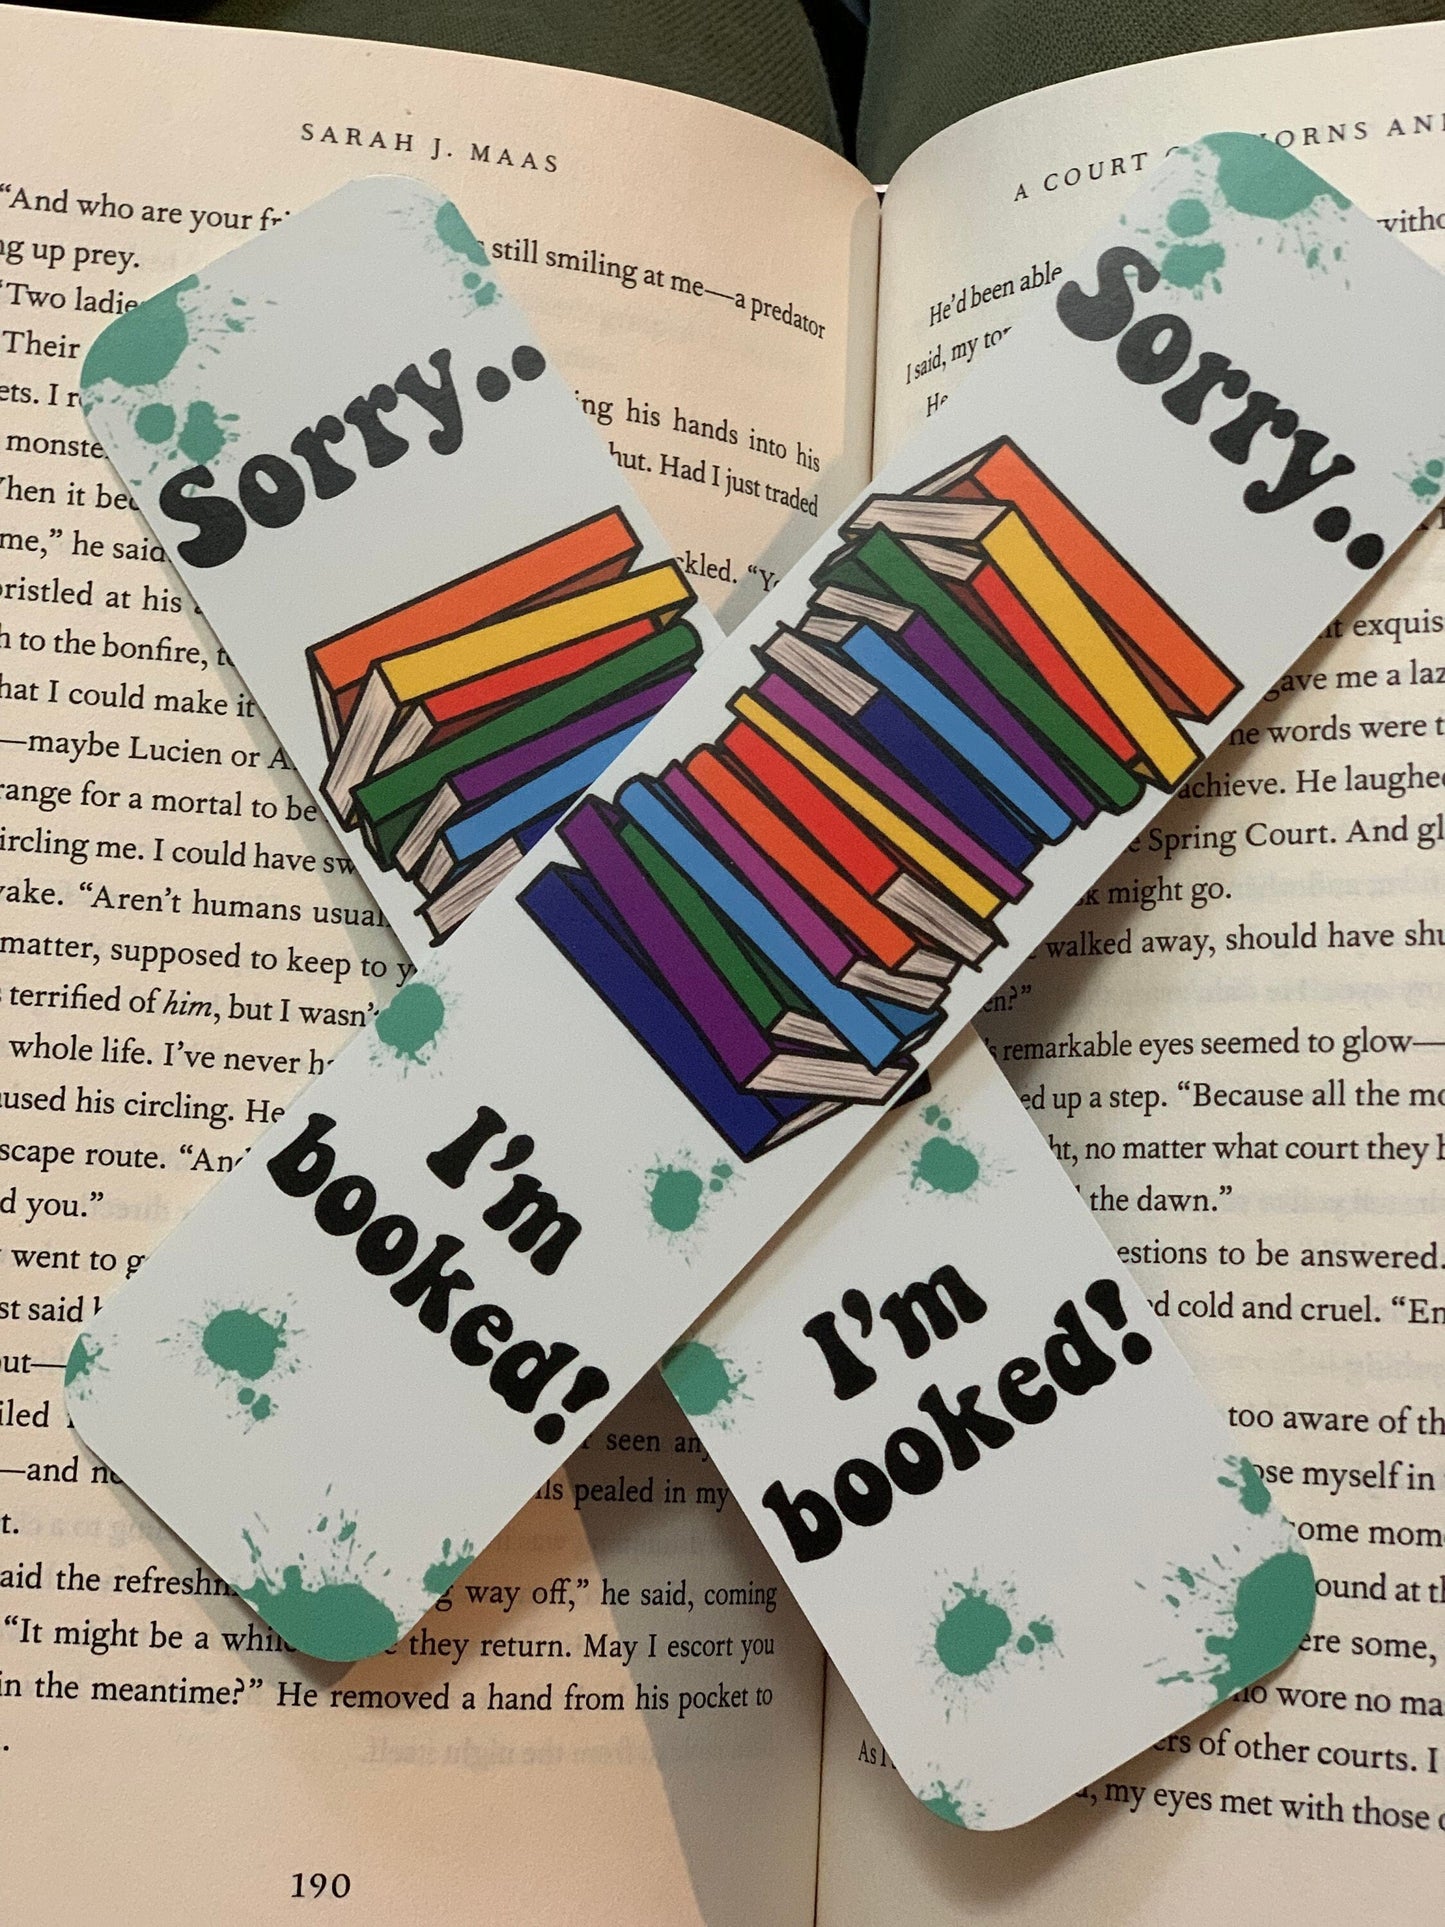 8x2in I'm booked Bookmark